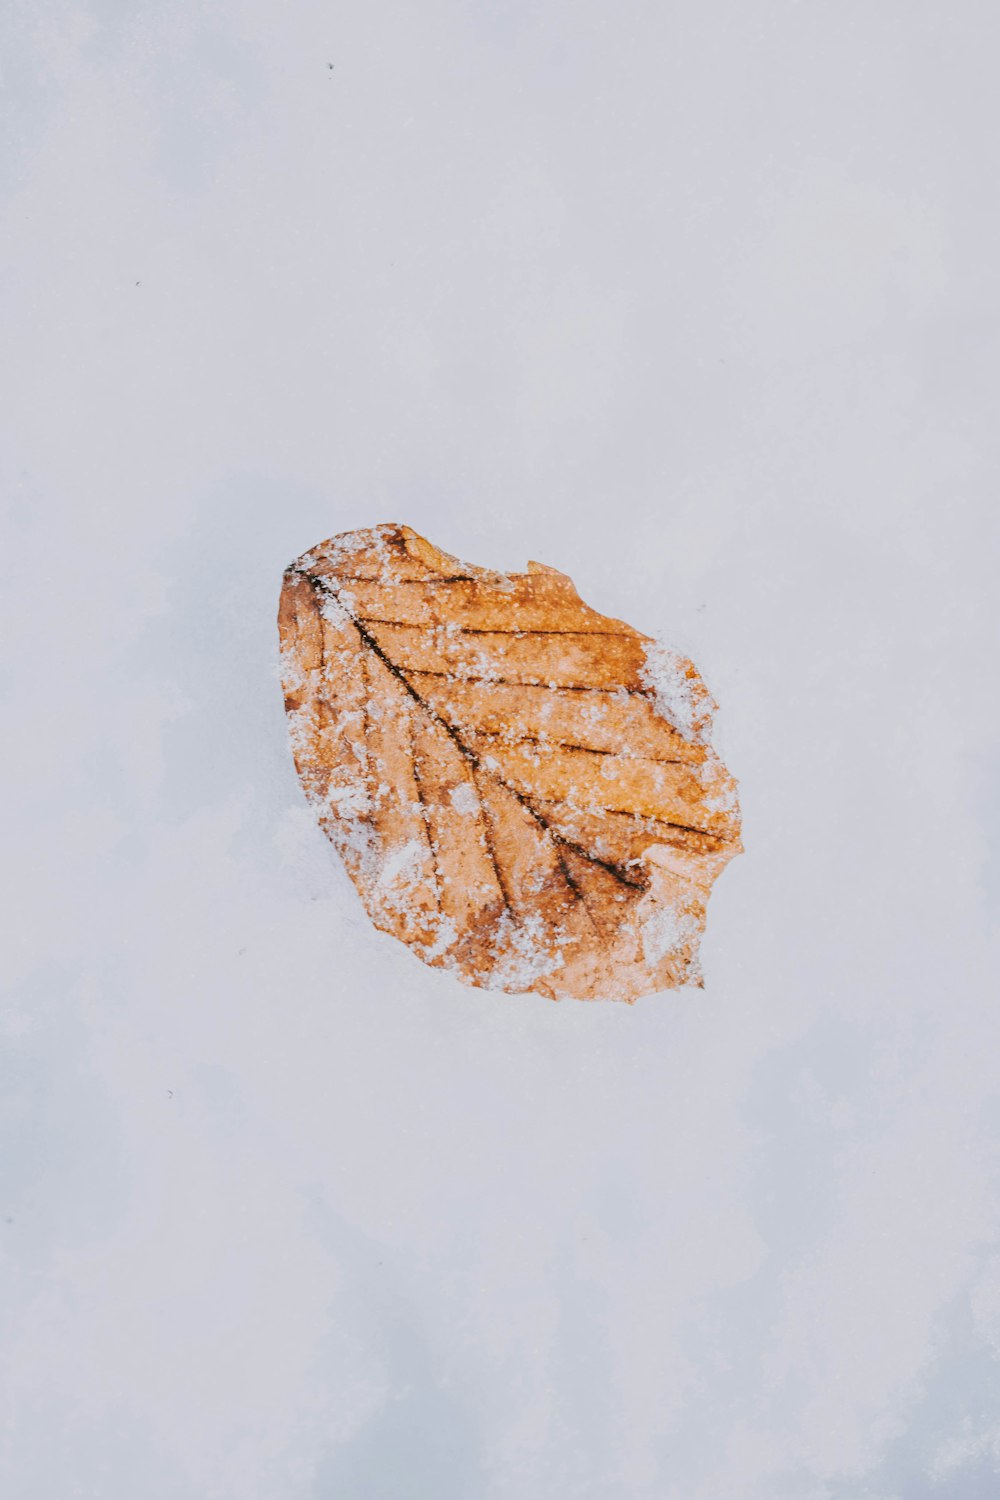 dried leaf covering with snow